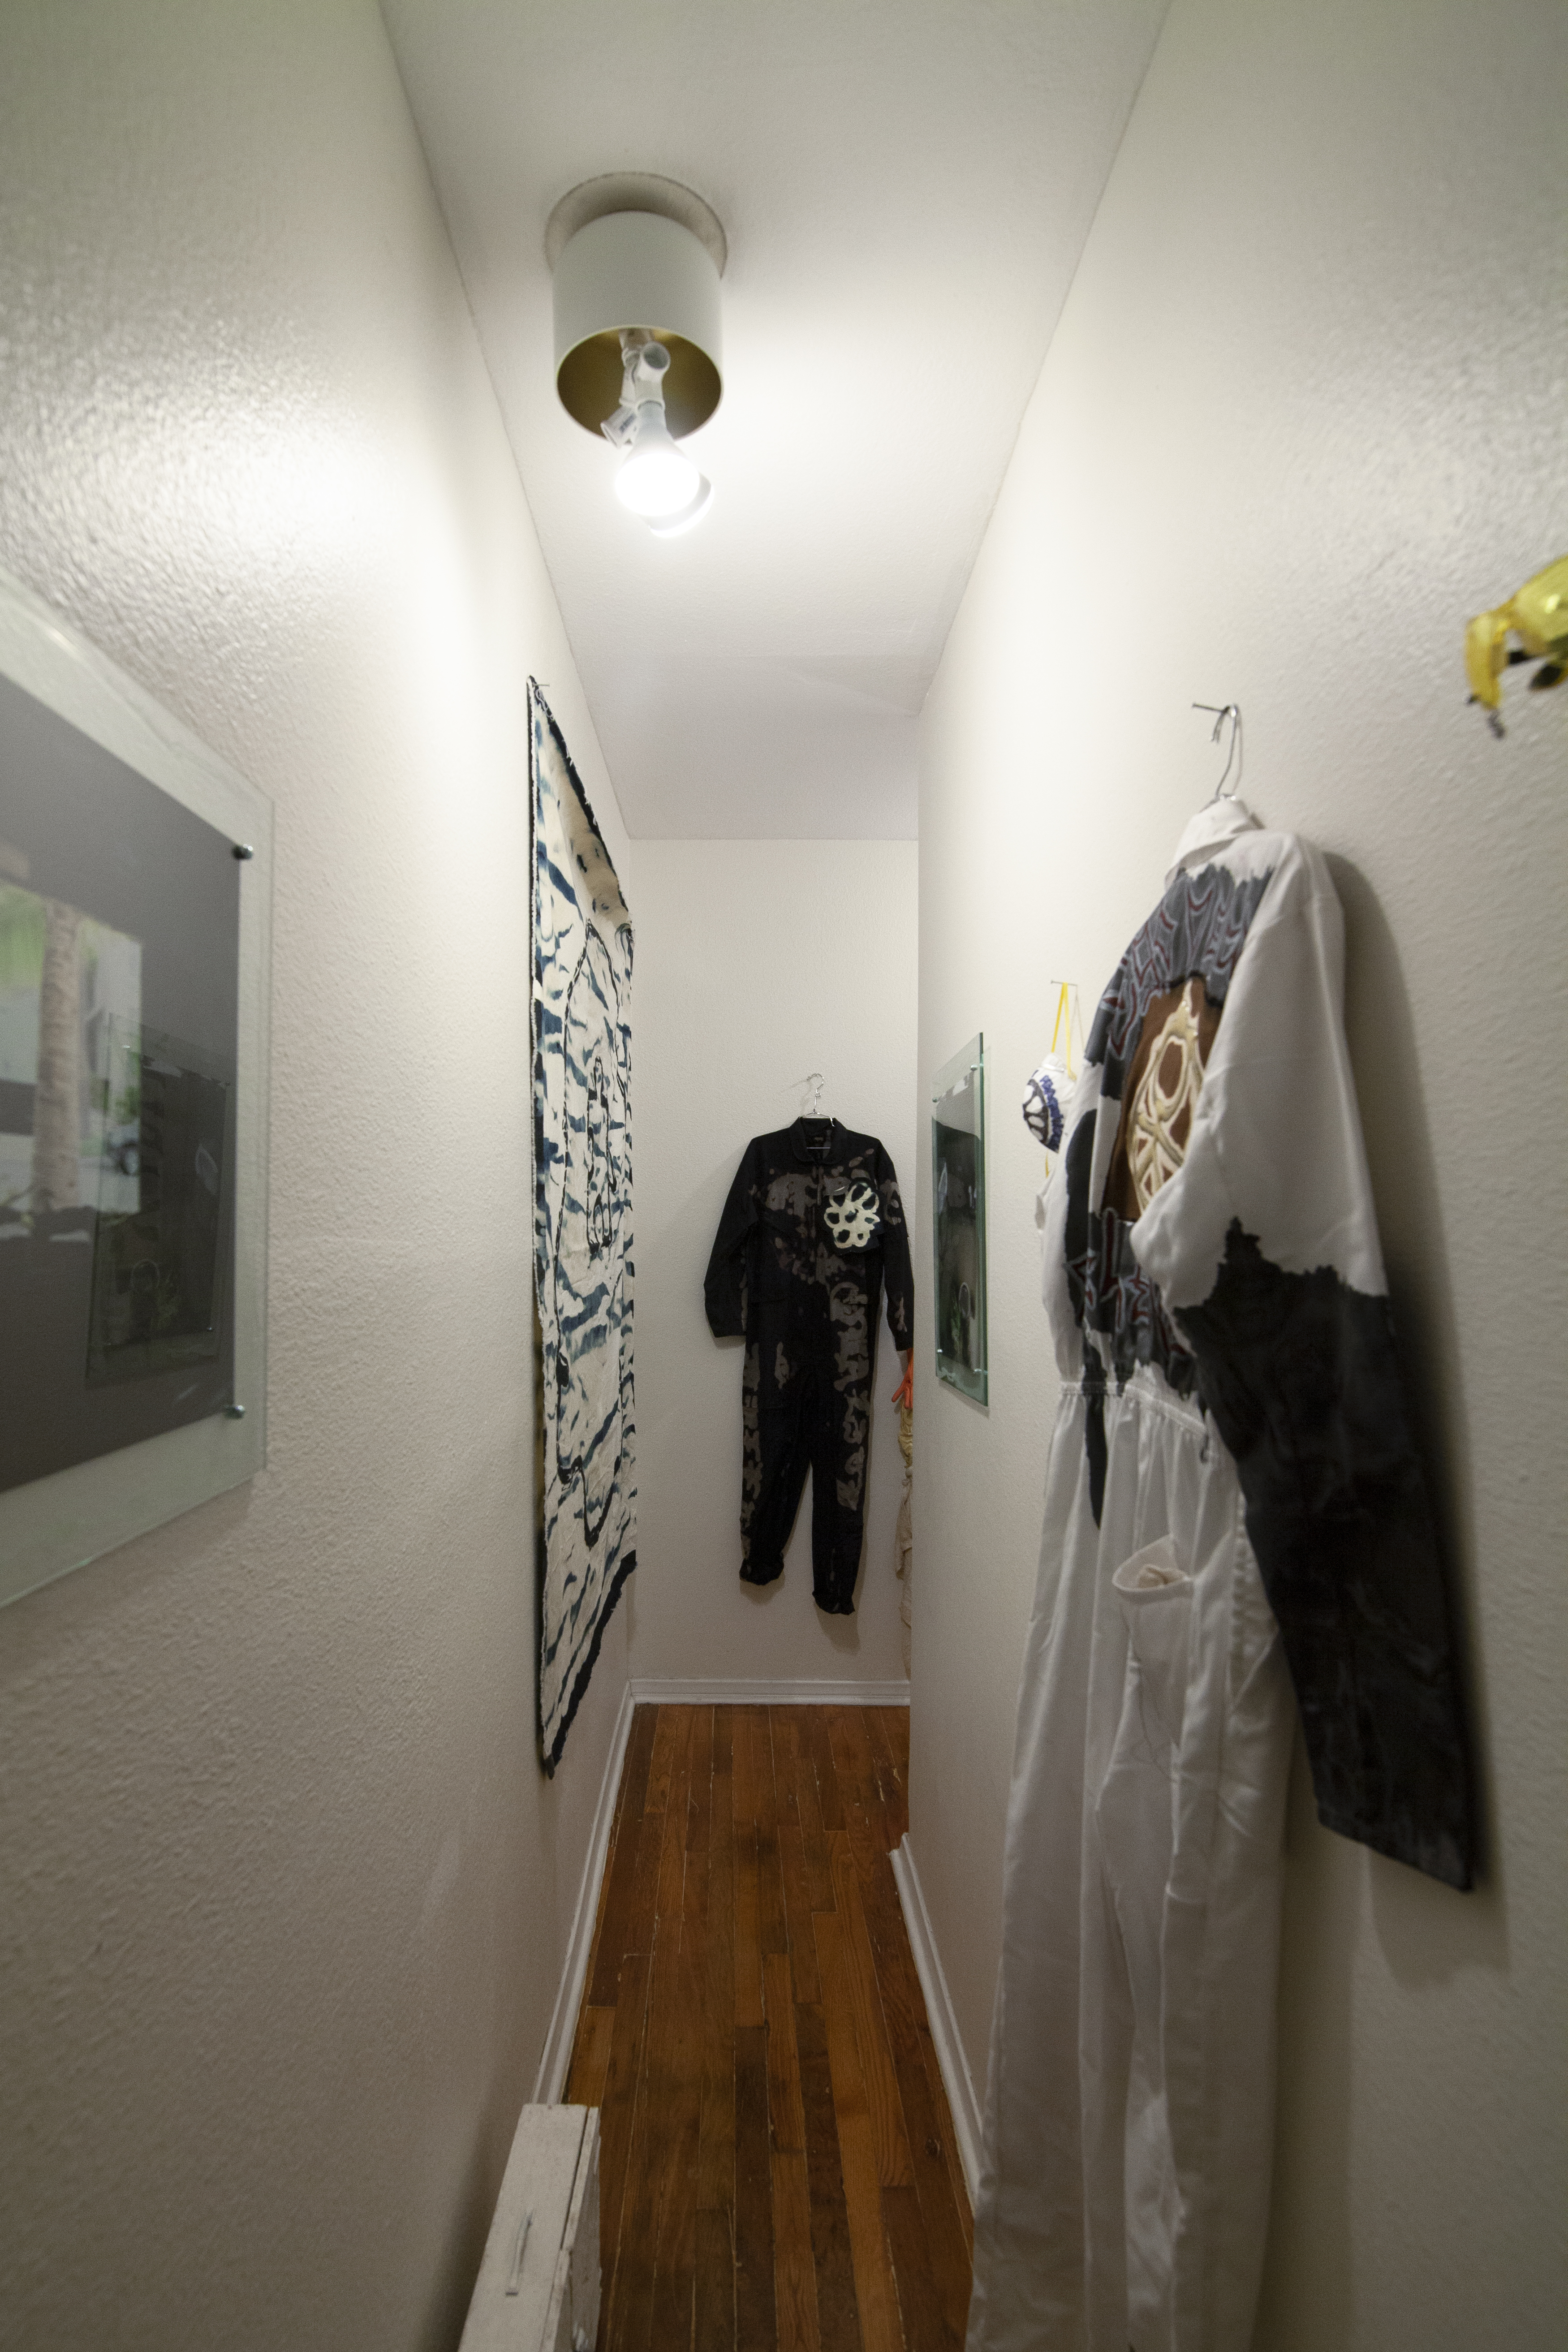 A narrow hallway with jumpsuits, photo prints and artworks hung on white walls